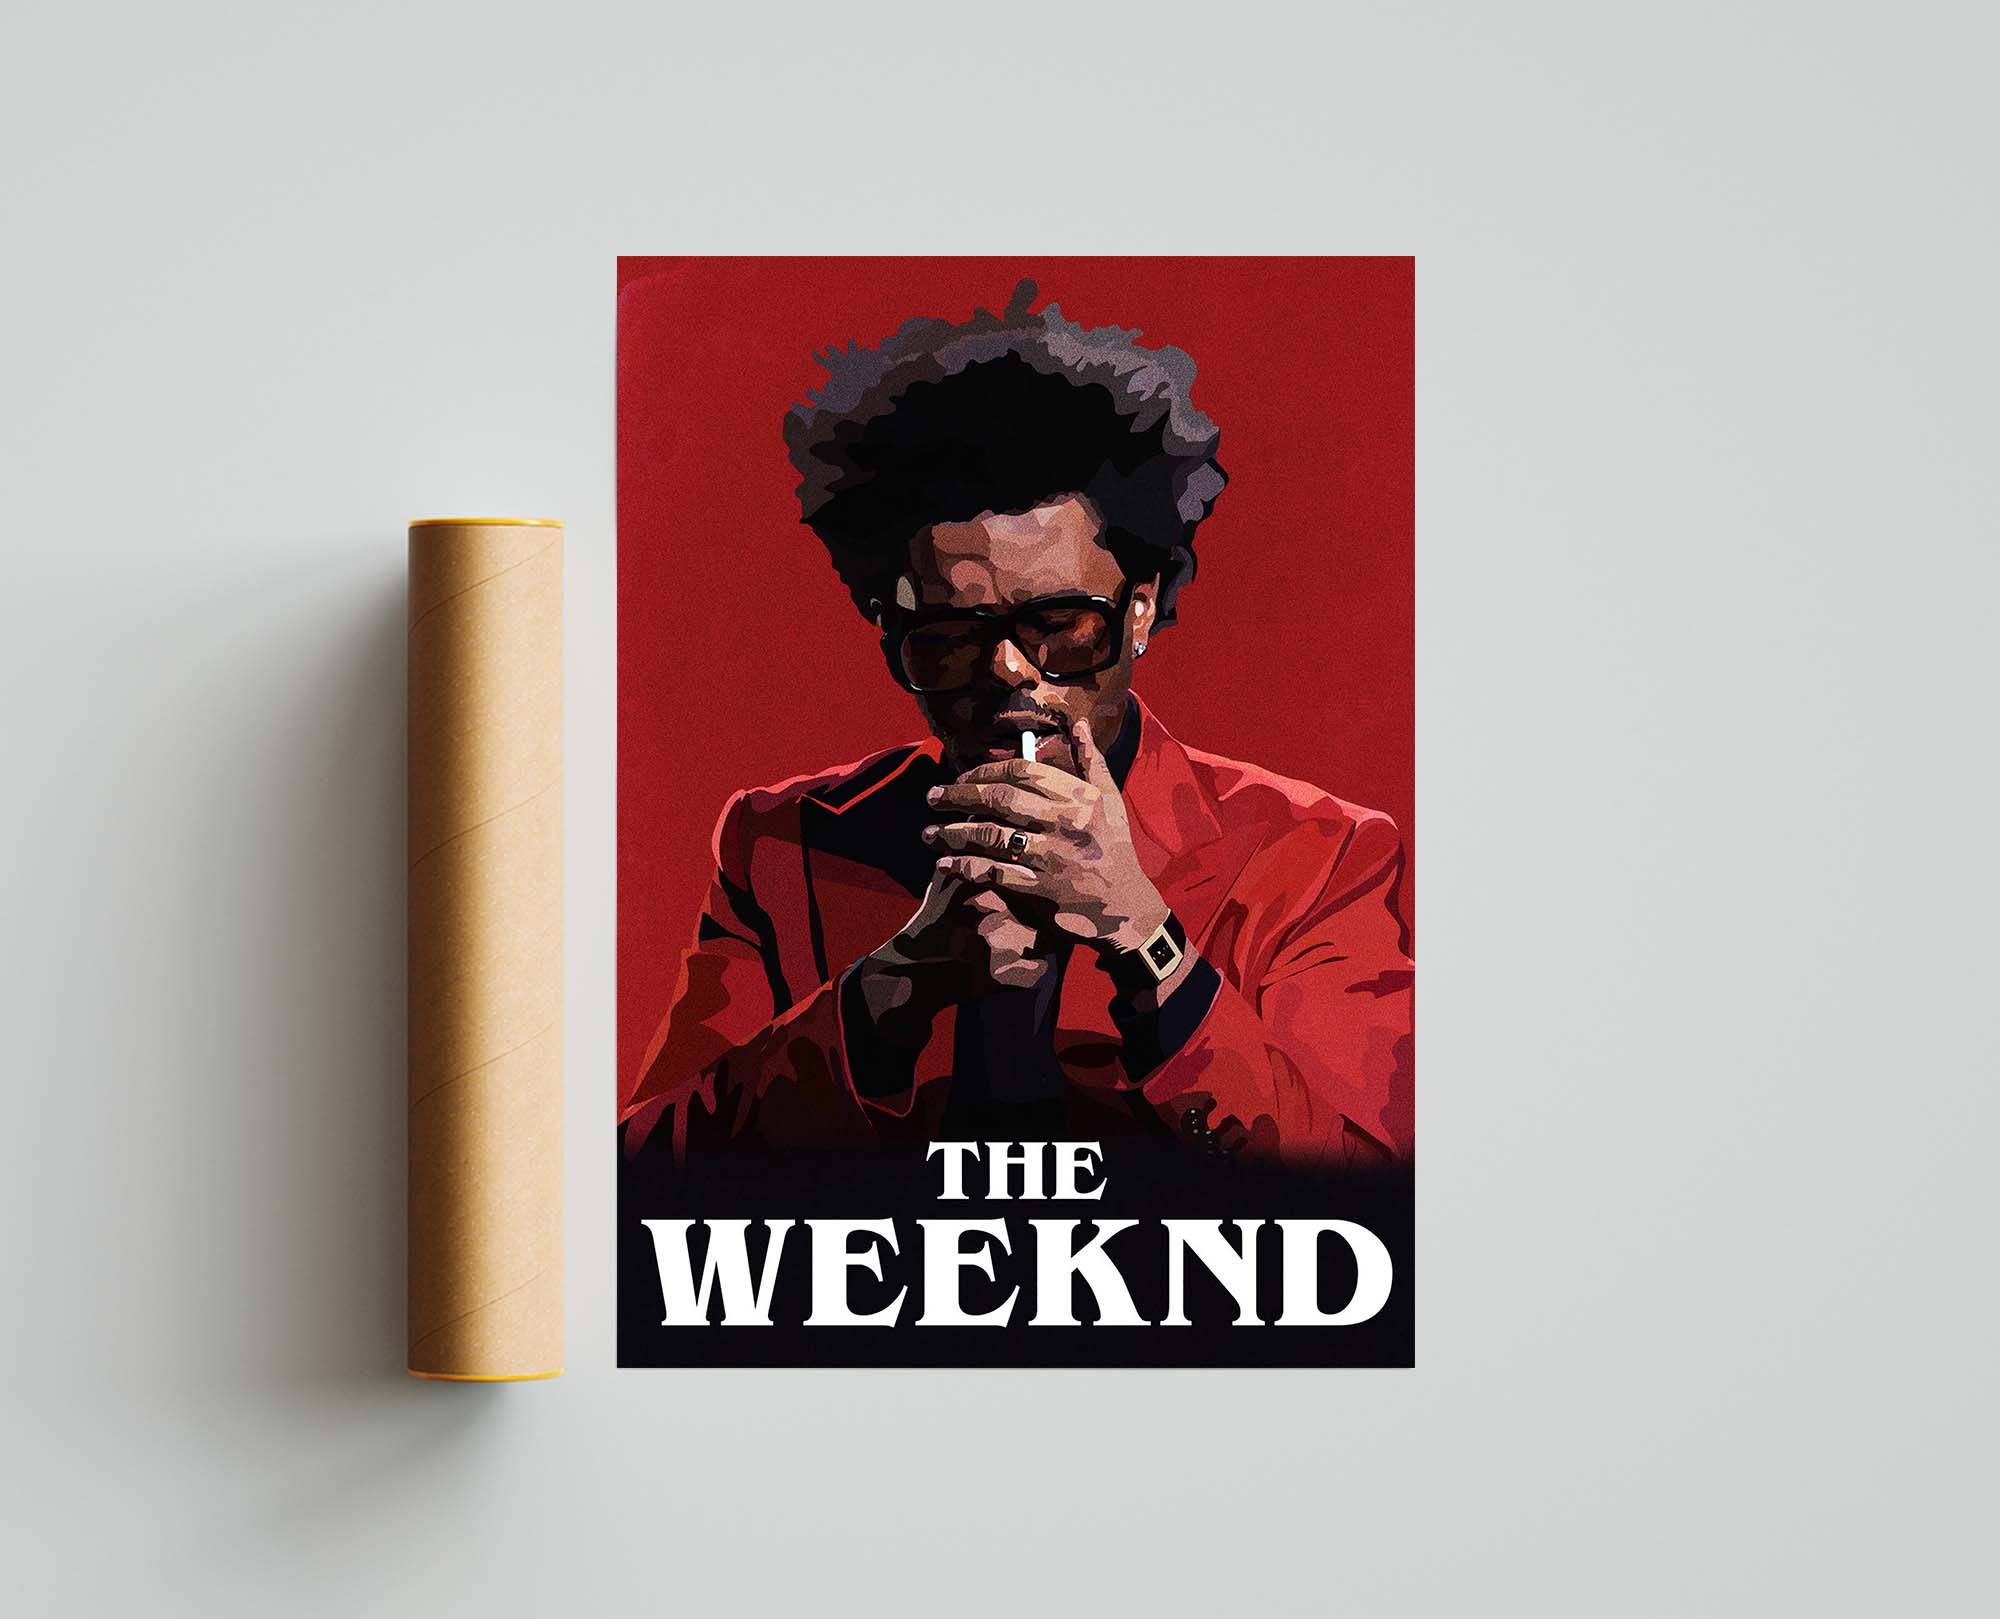 The Weeknd' Poster by SirHerald Archonkun, Displate